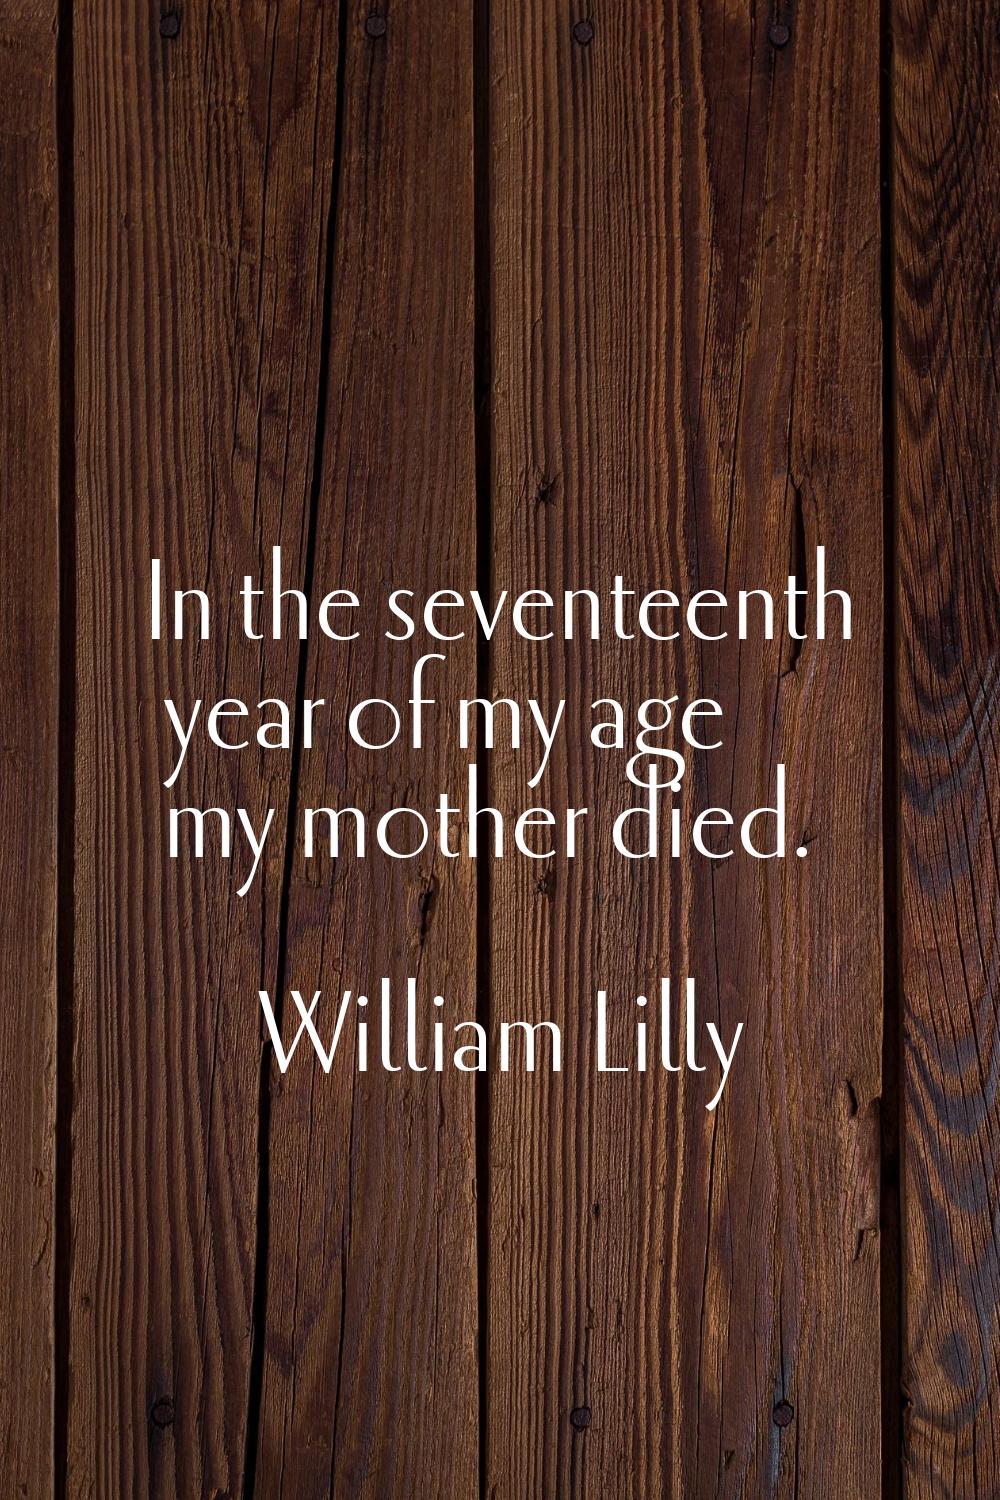 In the seventeenth year of my age my mother died.